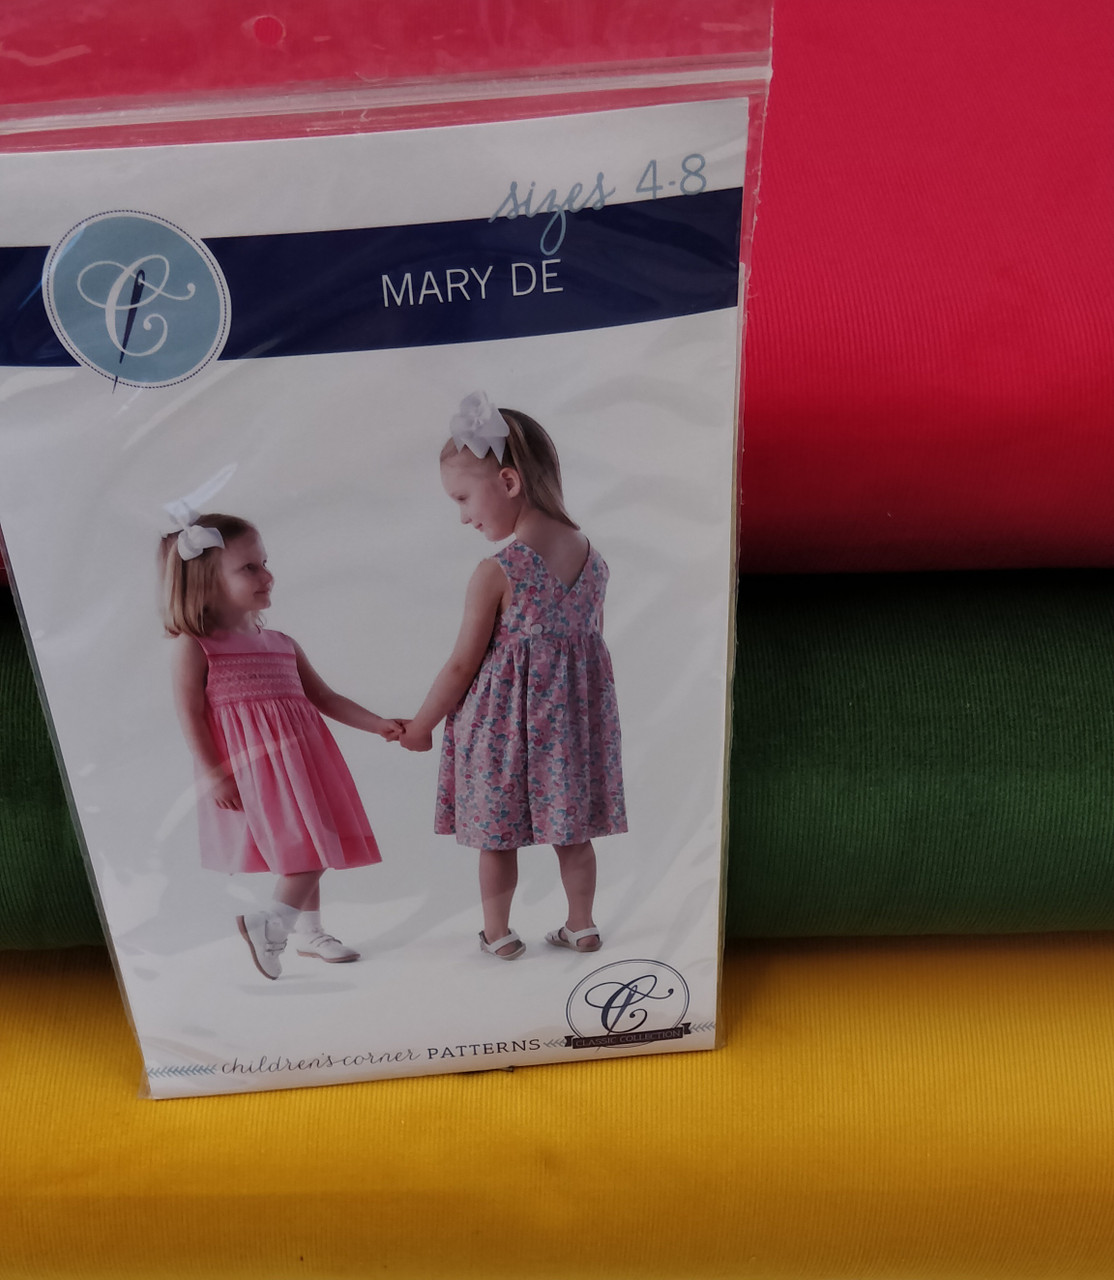 Baby needlecord shown with suggested pattern Mary De by Children's Corner